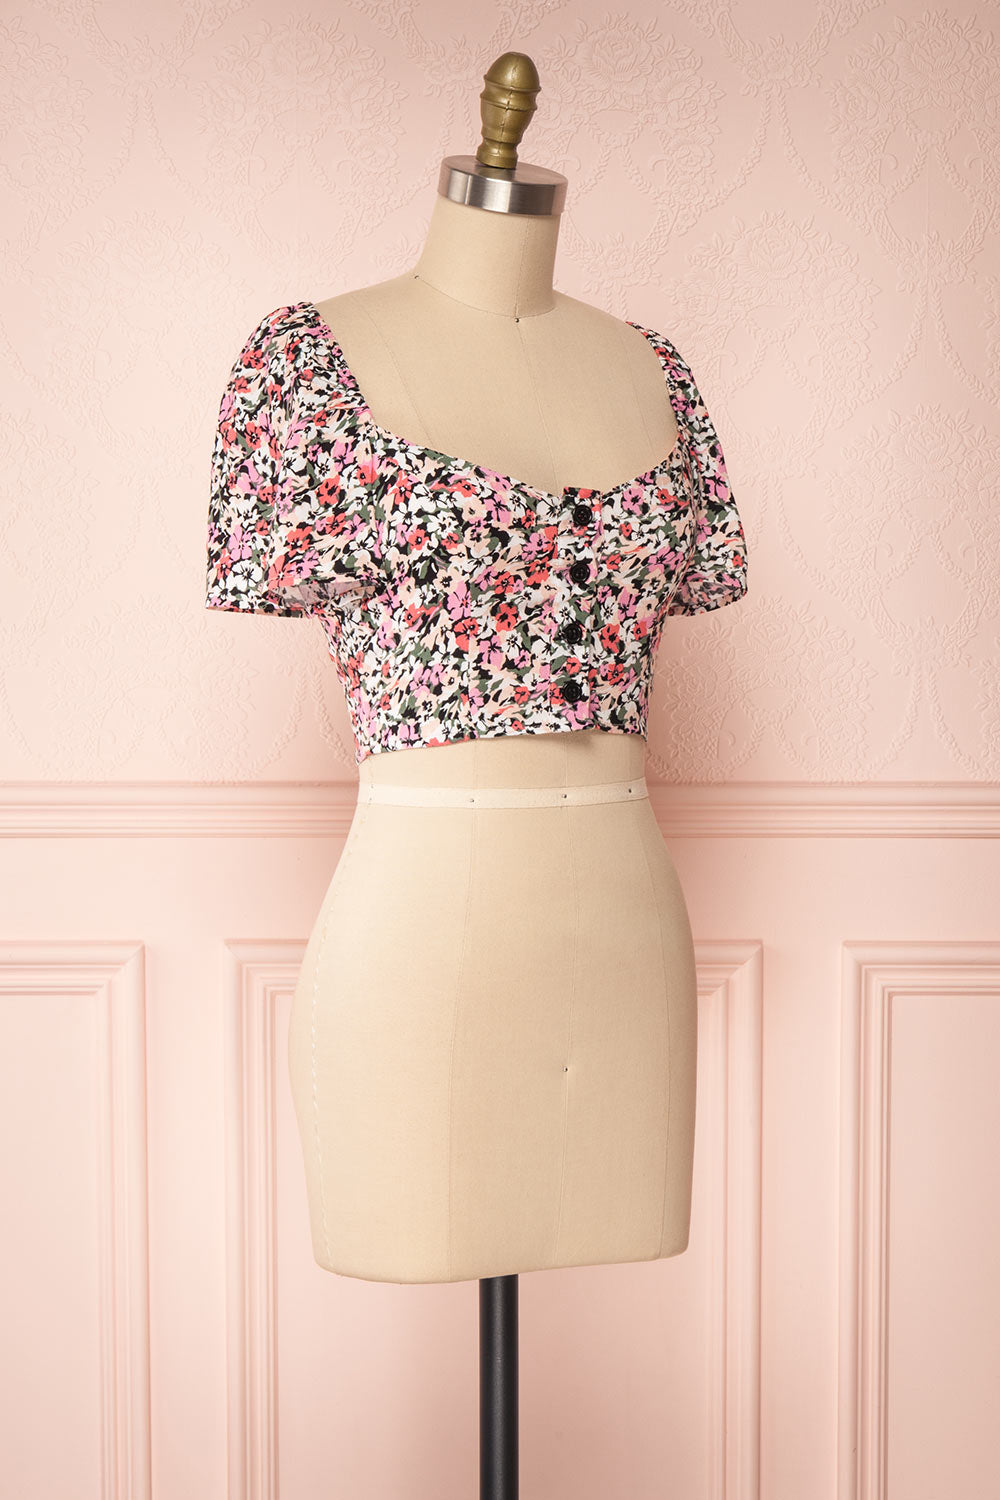 Insko Pink Floral Buttoned Crop Top | Boutique 1861 side view 